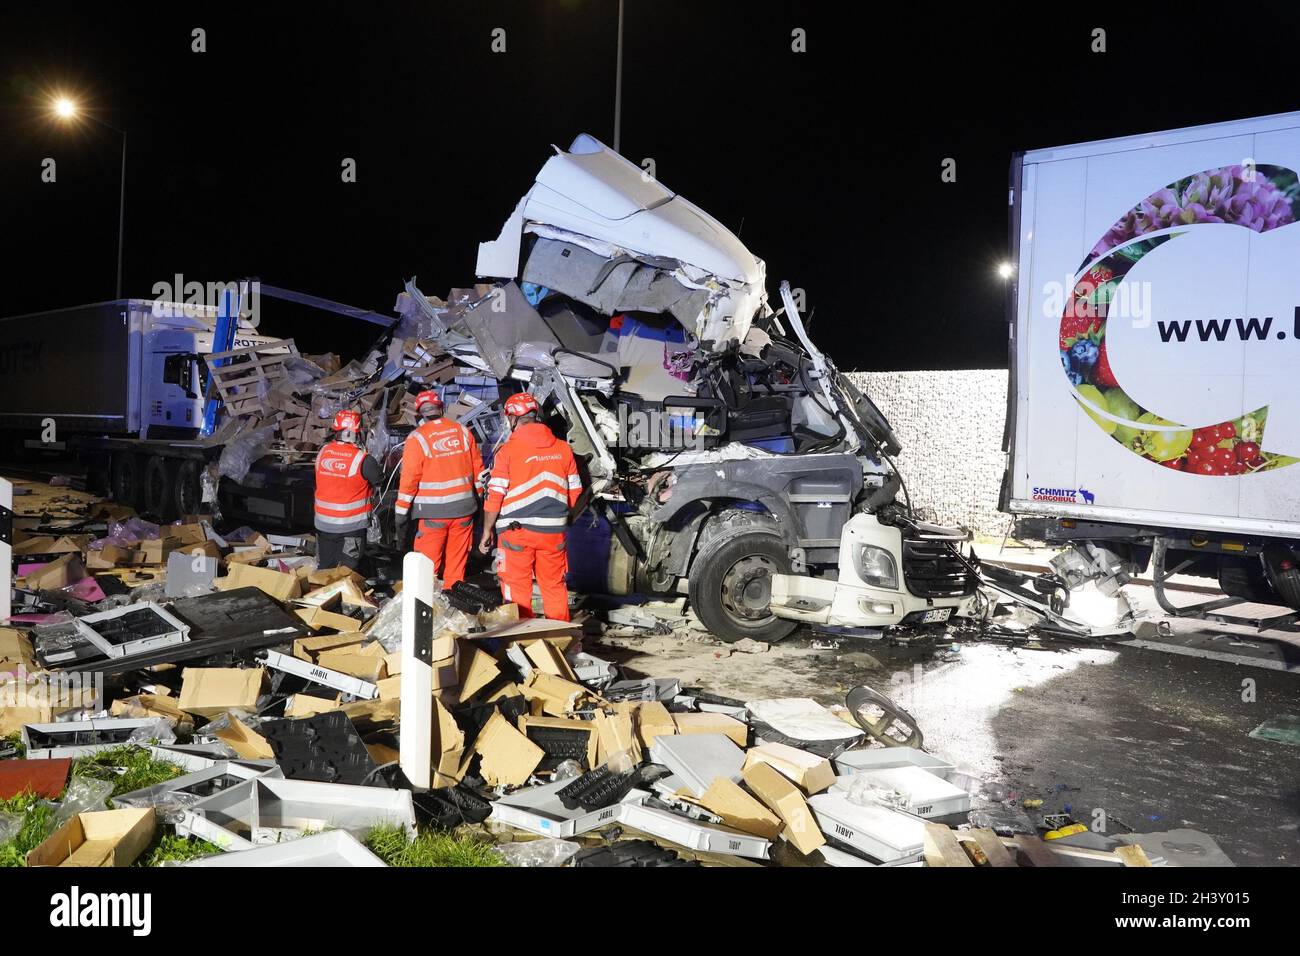 Sindelfingen, Germany. 30th Oct, 2021. Emergency services inspect the scene of the accident. A man has died in an accident involving several trucks at a parking lot on the A8. (to dpa: "Fatal truck accident at parking lot on the A8") Credit: Andreas Rosar/dpa/Alamy Live News Stock Photo